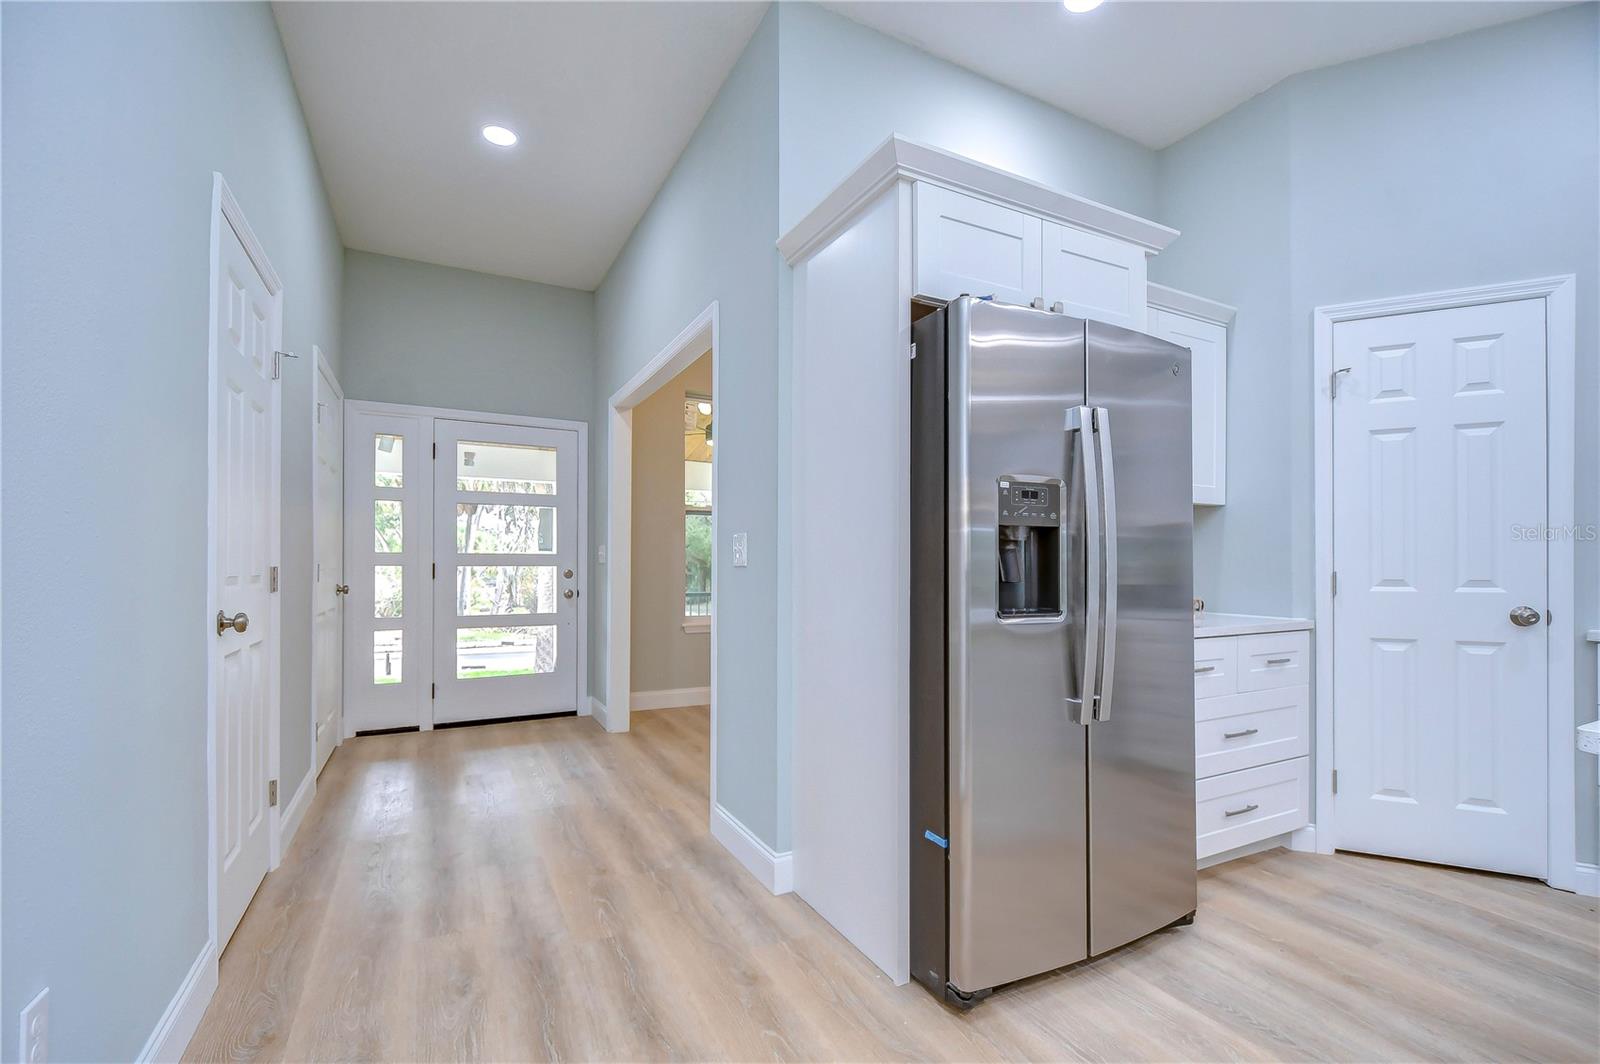 All new GE Stainless Steel Appliances are ready to be put to use!